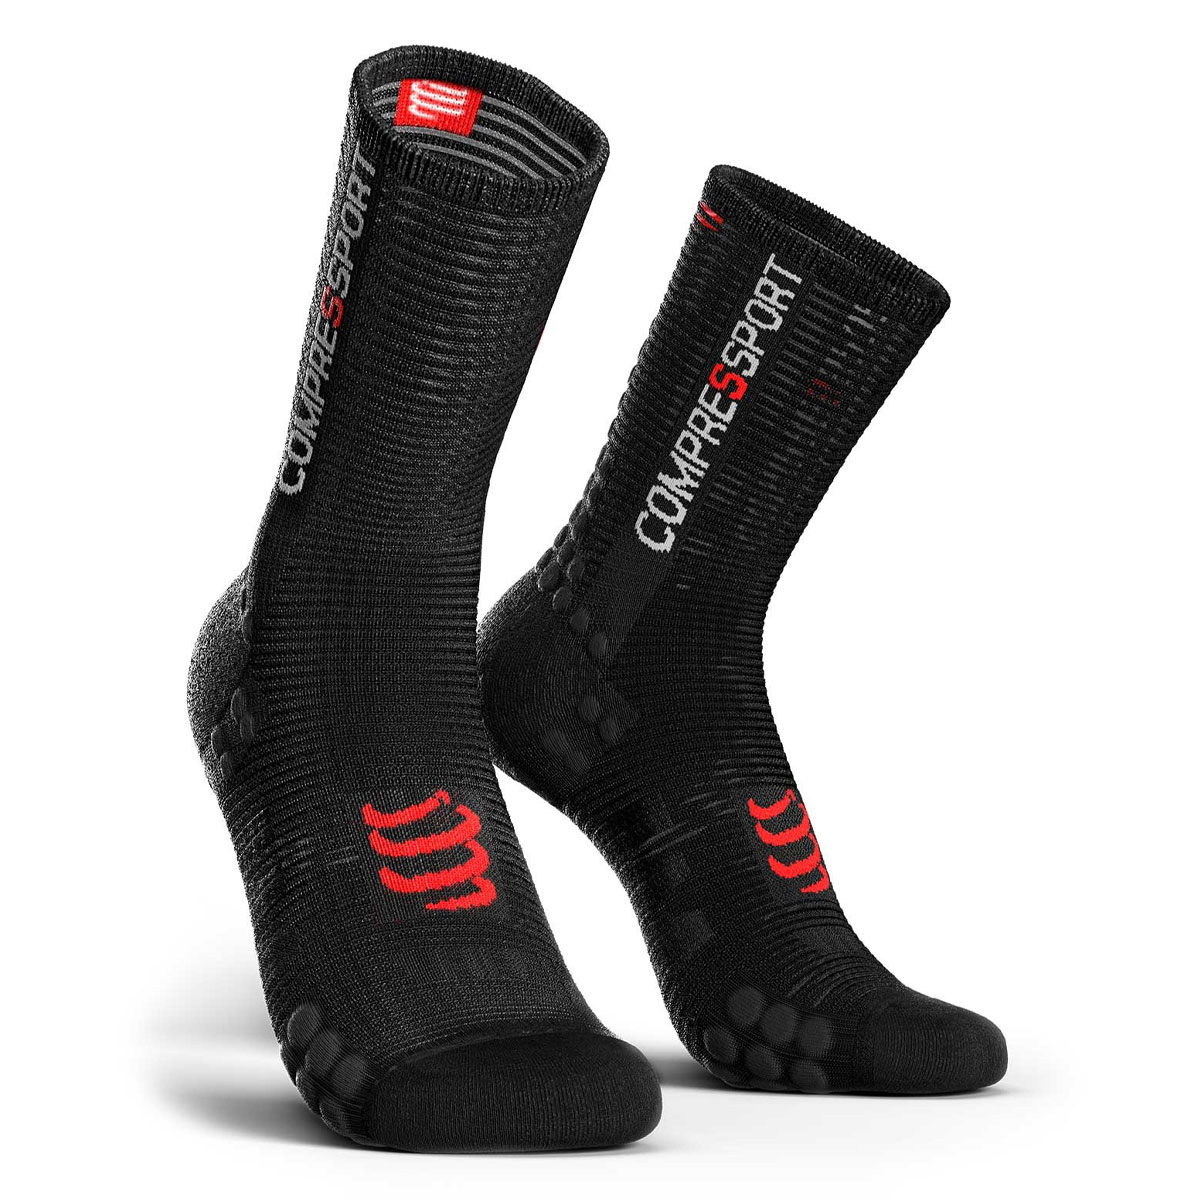 CHAUSSETTES COMPRESSPORT RACING V3 LONG VELO